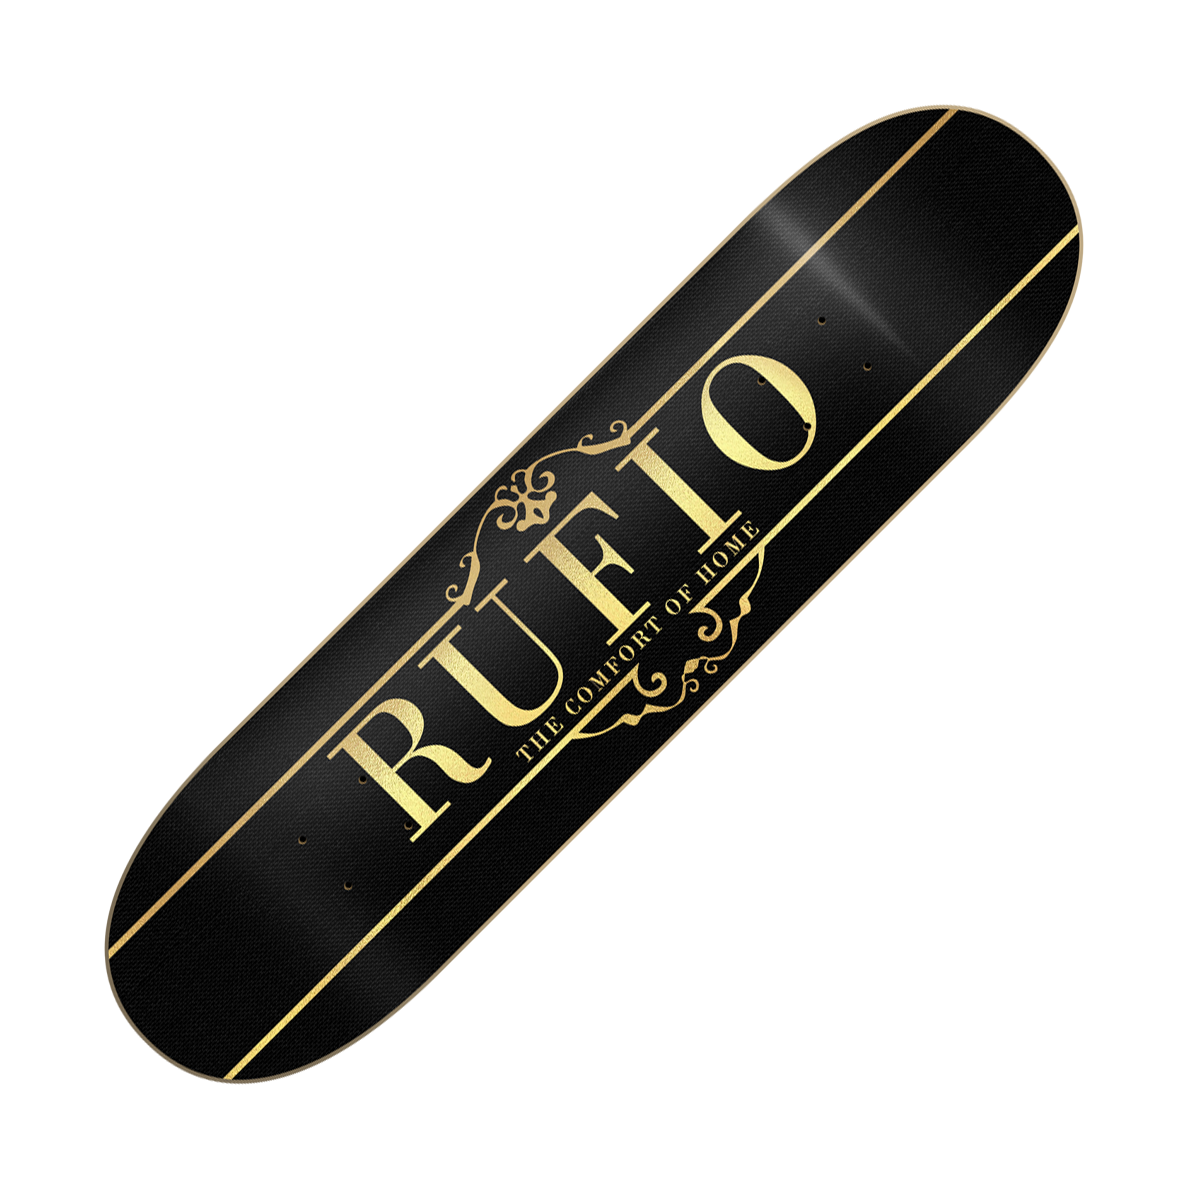 RUFIO - "The Comfort Of Home (Black/Gold)"